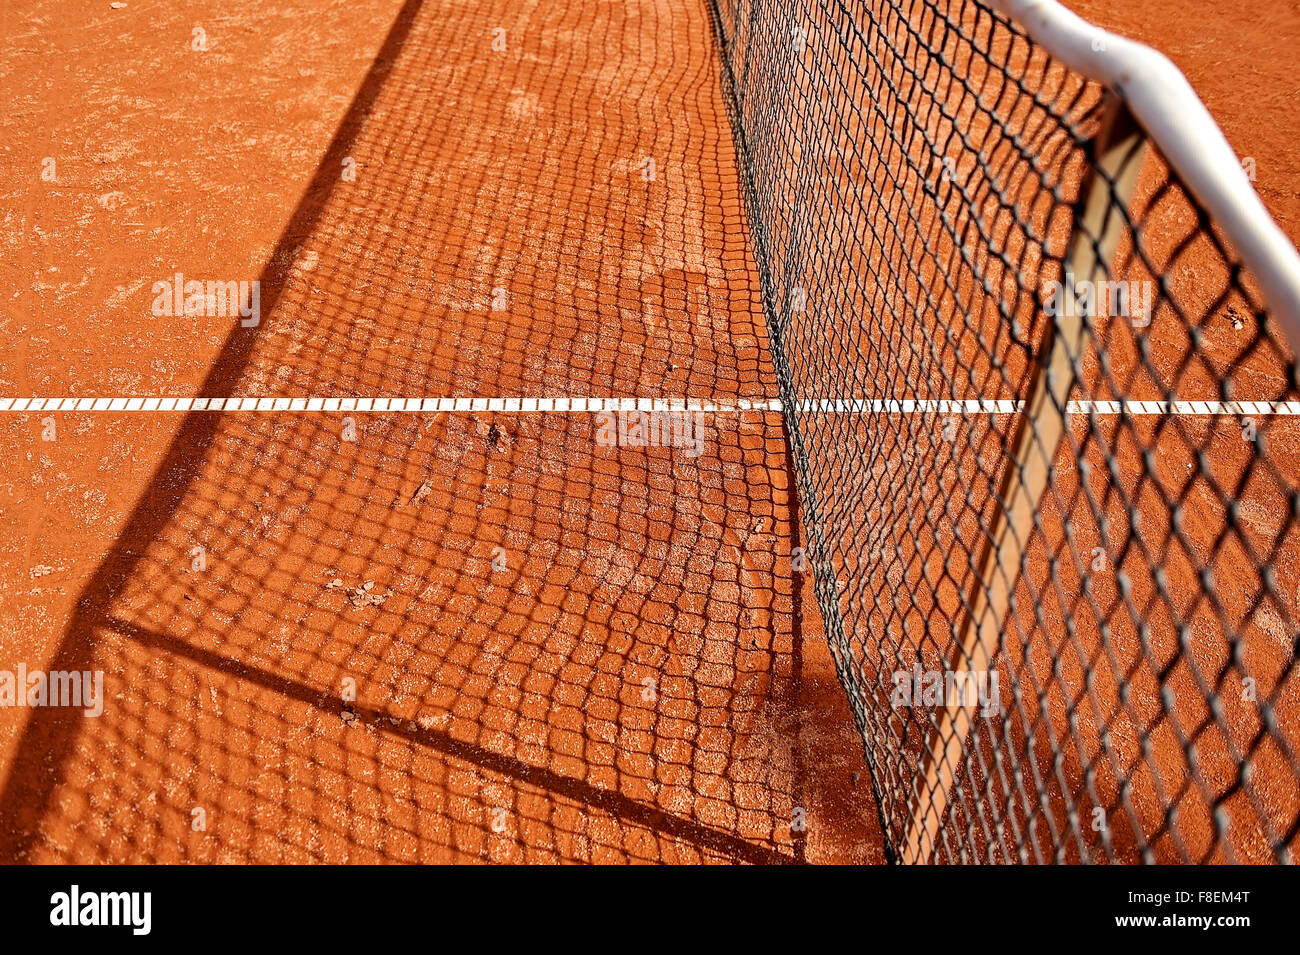 Detail shot with a tennis net on a tennis clay court Stock Photo